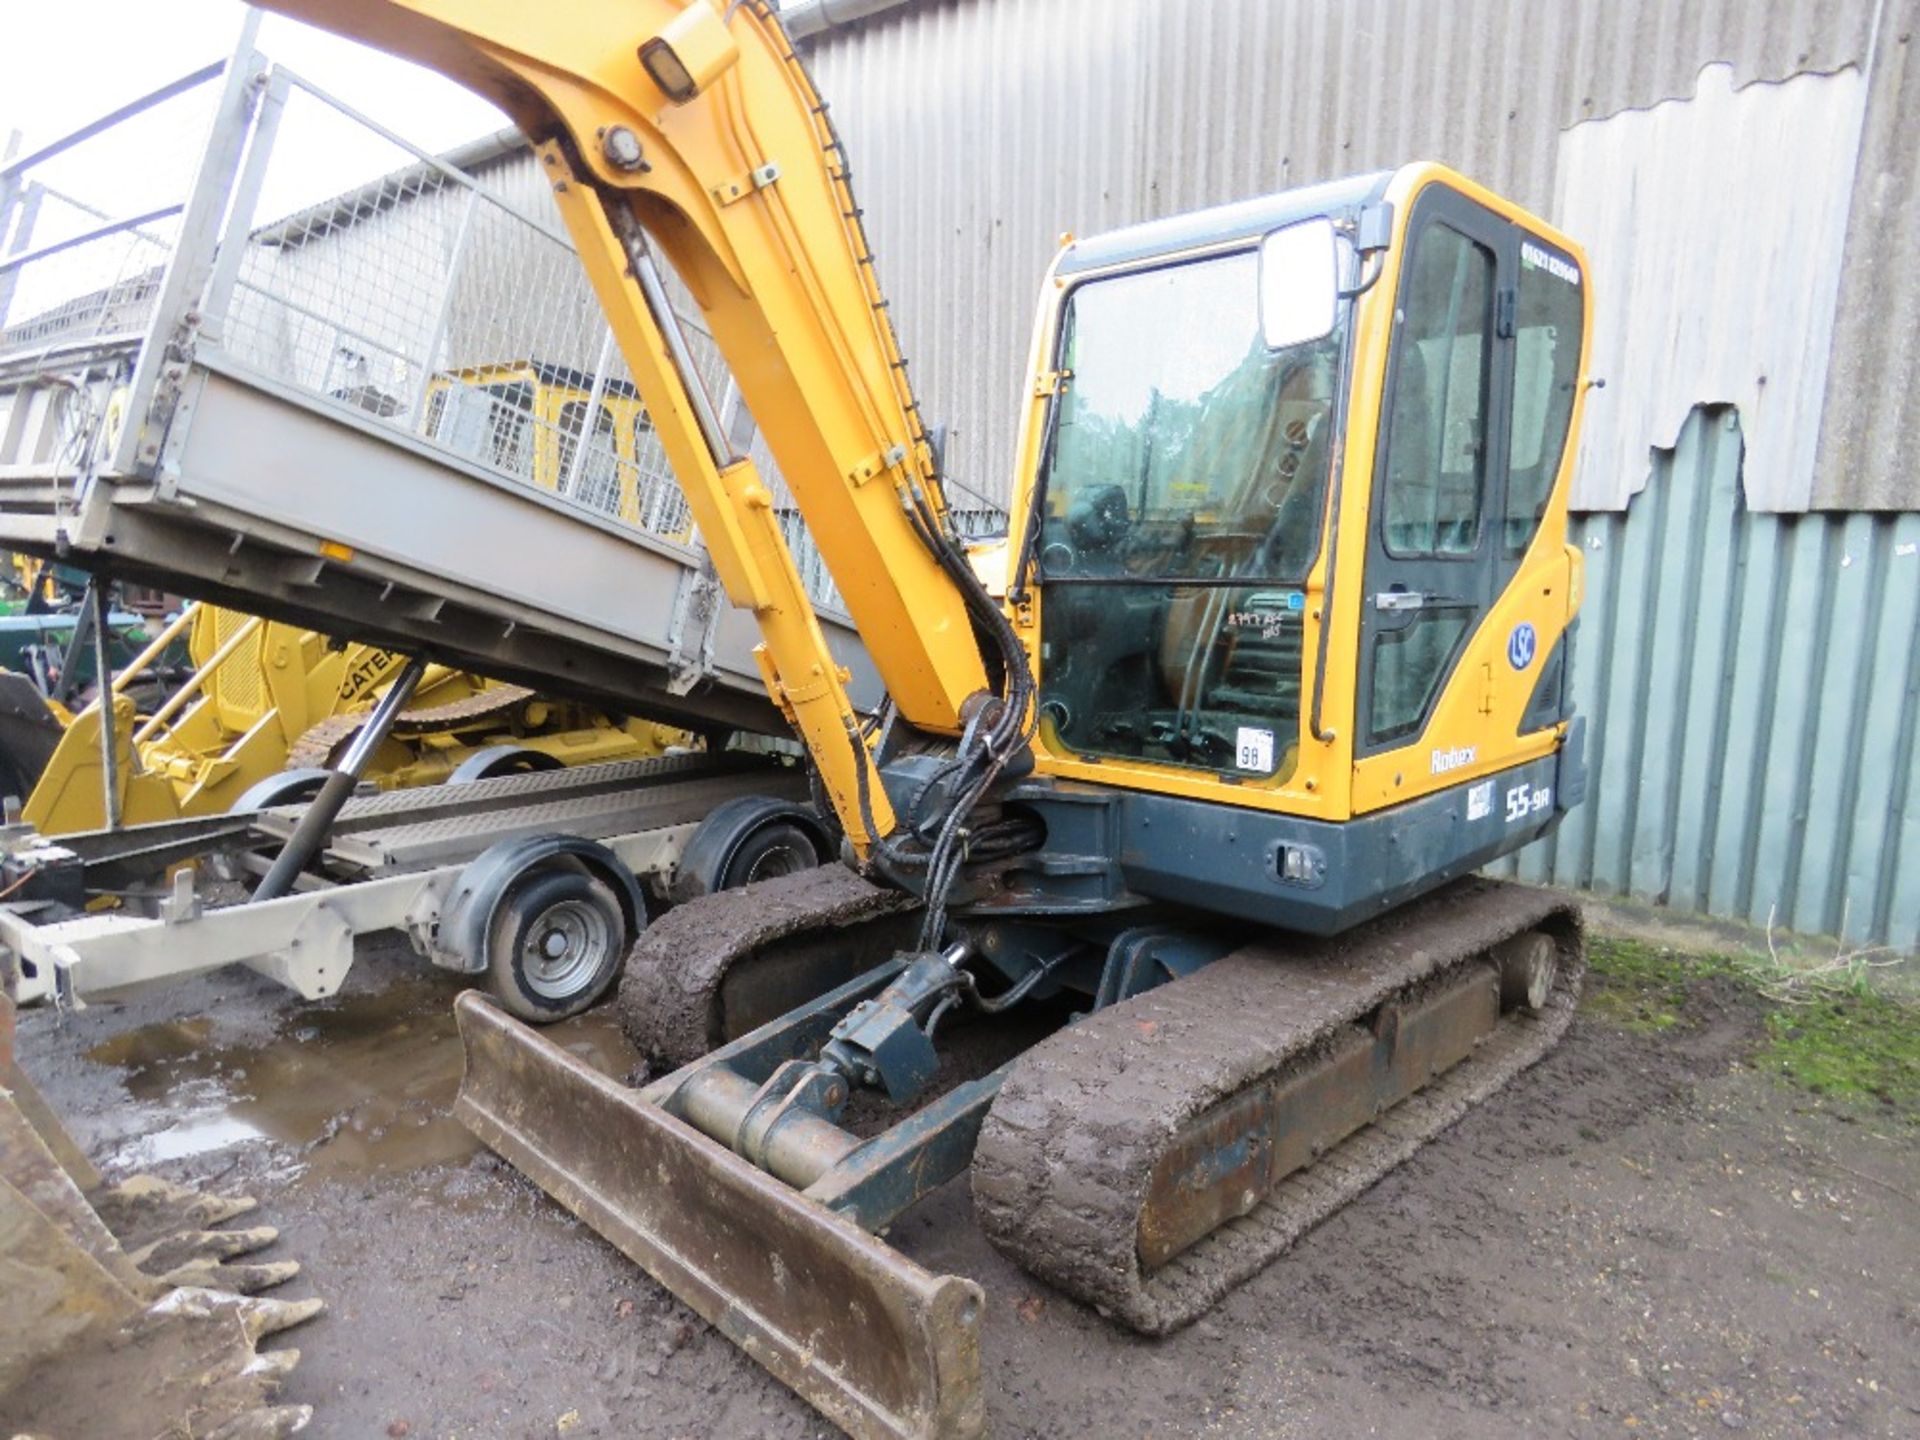 HYUNDAI ROBEX 55-9A RUBBER TRACKED EXCAVATOR, YEAR 2017 BUILD, 5500KG RATED, SET OF 3 BUCKETS, ADDIT